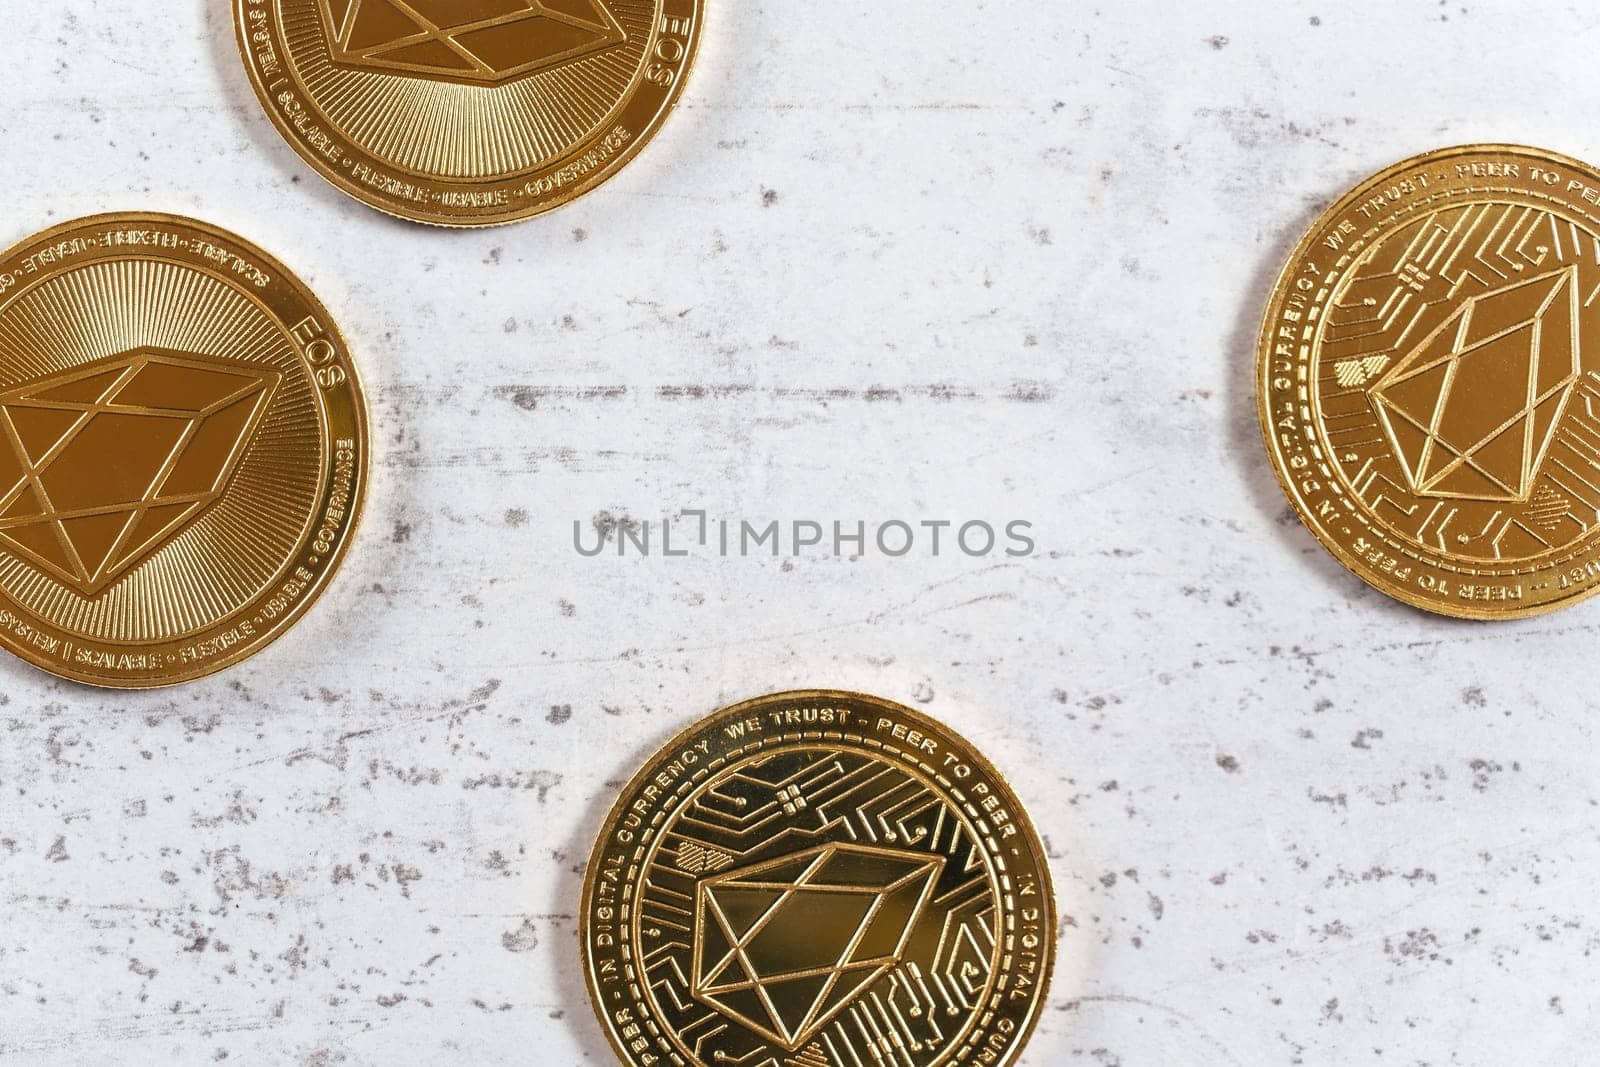 Golden commemorative EOS - EOSIO  cryptocurrency - coins on white stone board, flat lay view by Ivanko